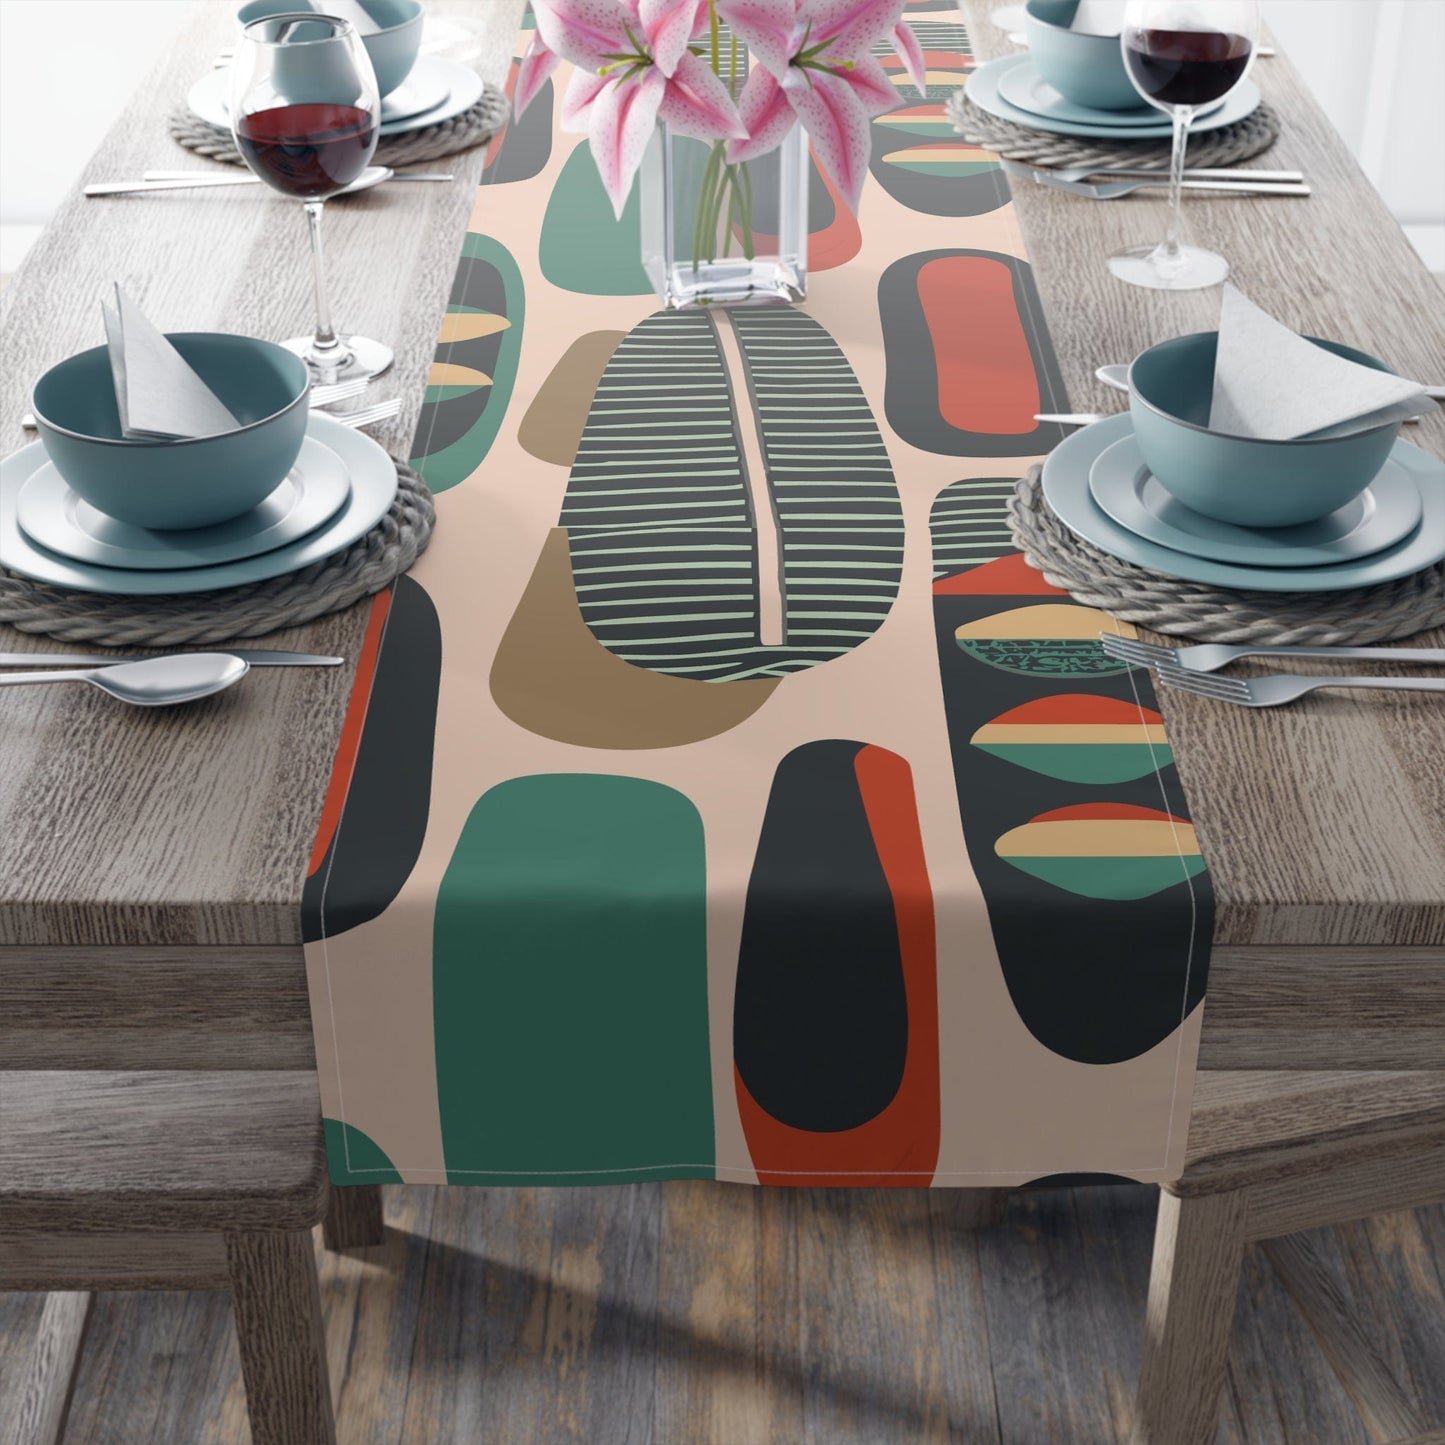 Kate McEnroe New York Retro Mod Table Runner, MCM Geometric Dining Decor, Abstract Shapes Table Linen, Mid Century Modern Table Accessory Table Runners 16" × 90" / Cotton Twill 20993247978682289423